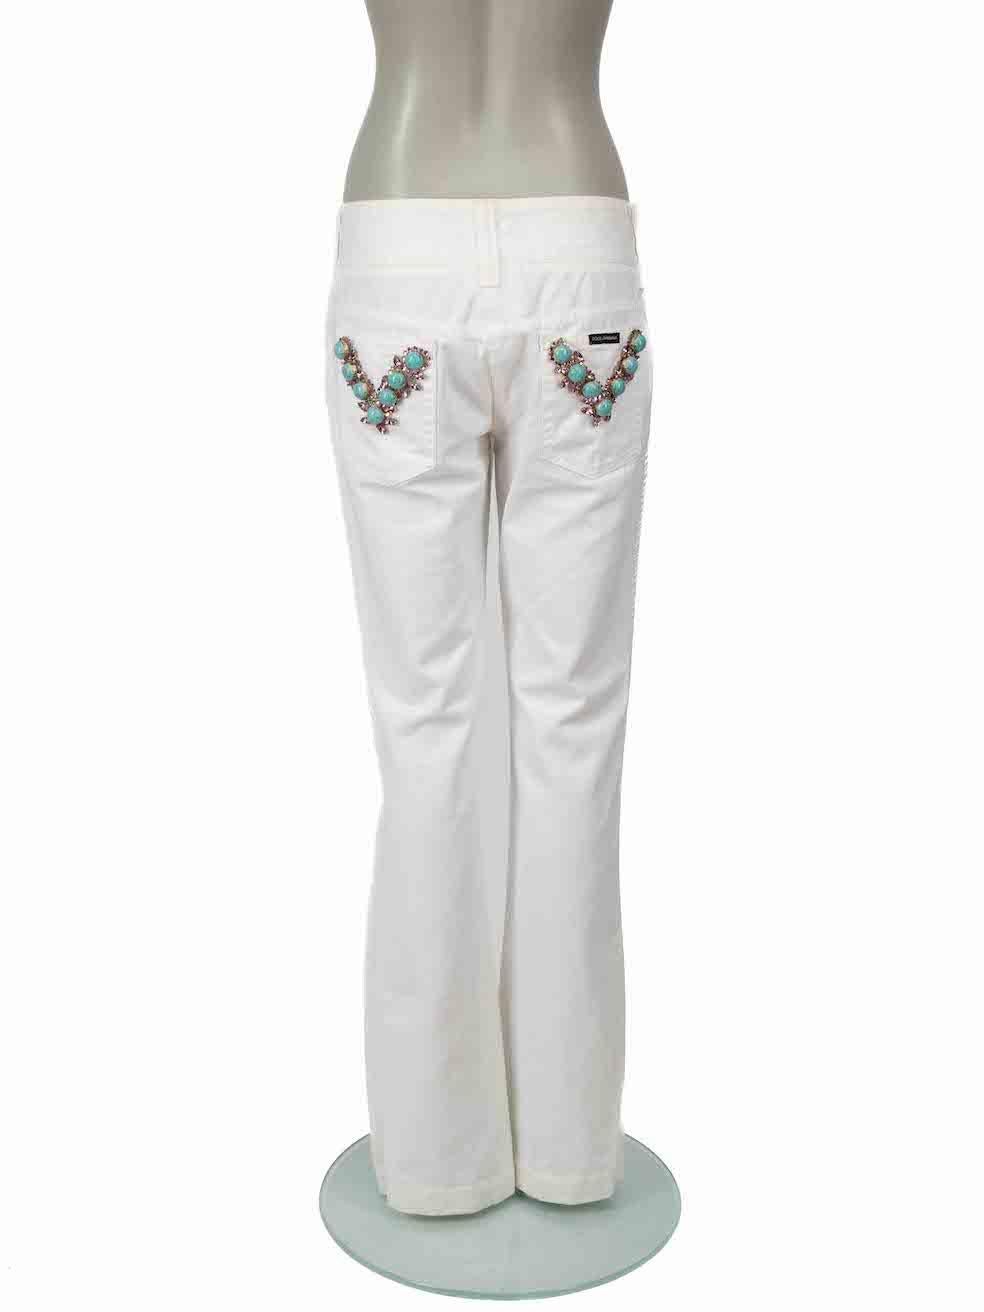 CONDITION is Very good. Minimal wear to jeans is evident. Minimal discoloured marks to overall fabric on this used Dolce & Gabbana designer resale item.

Details
White
Denim- Cotton
Straight leg trousers
Low rise
Front zip closure with buttons
2x